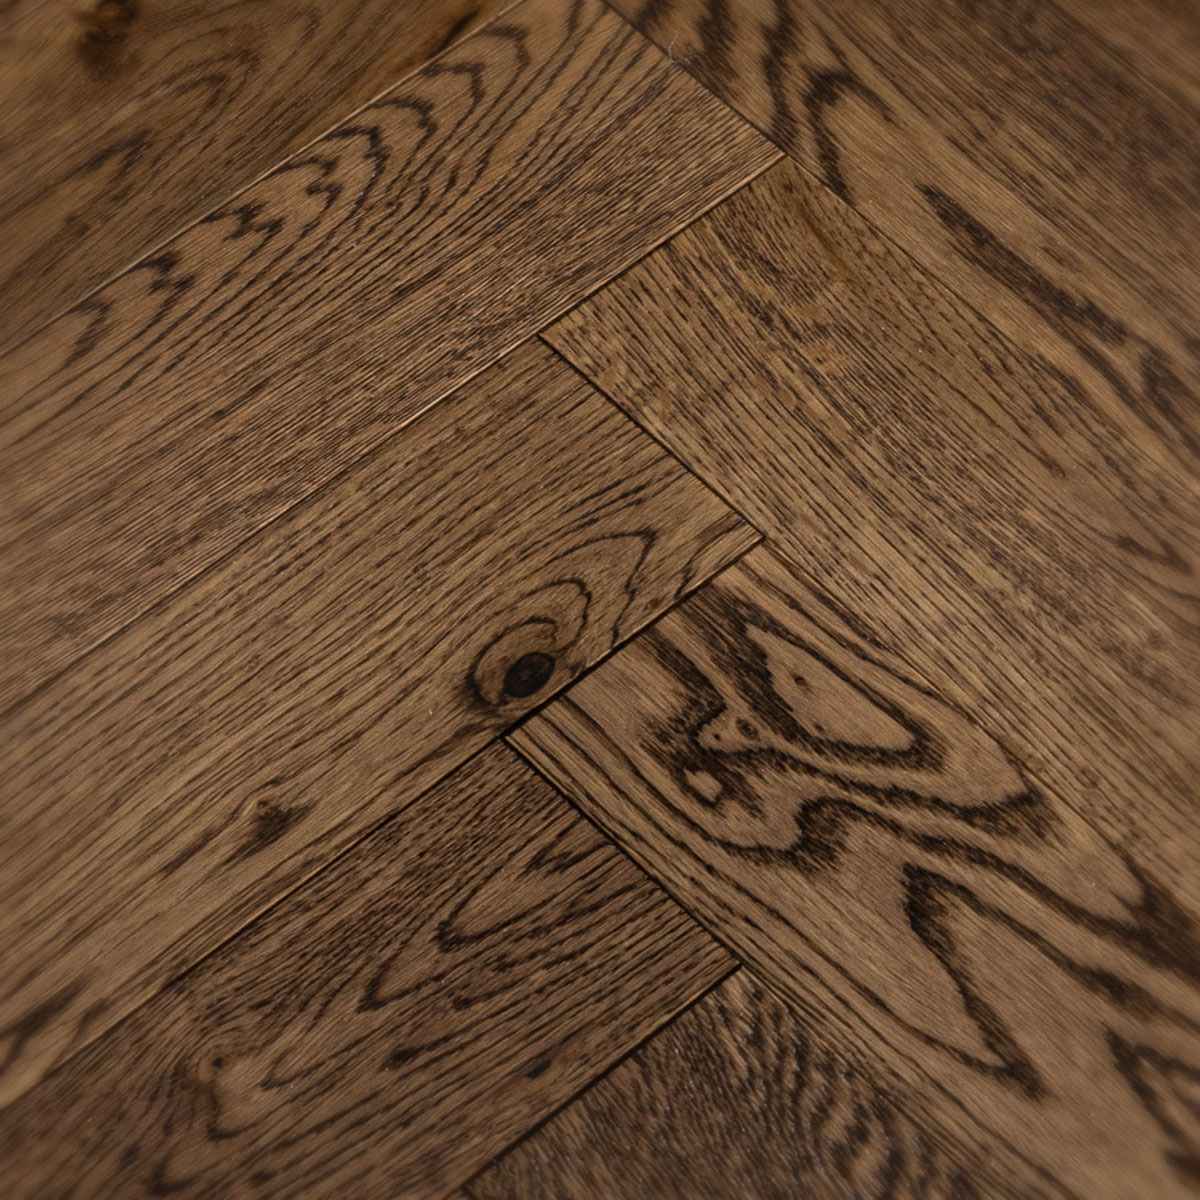 Natural-grade European oak floor finished with a walnut stain